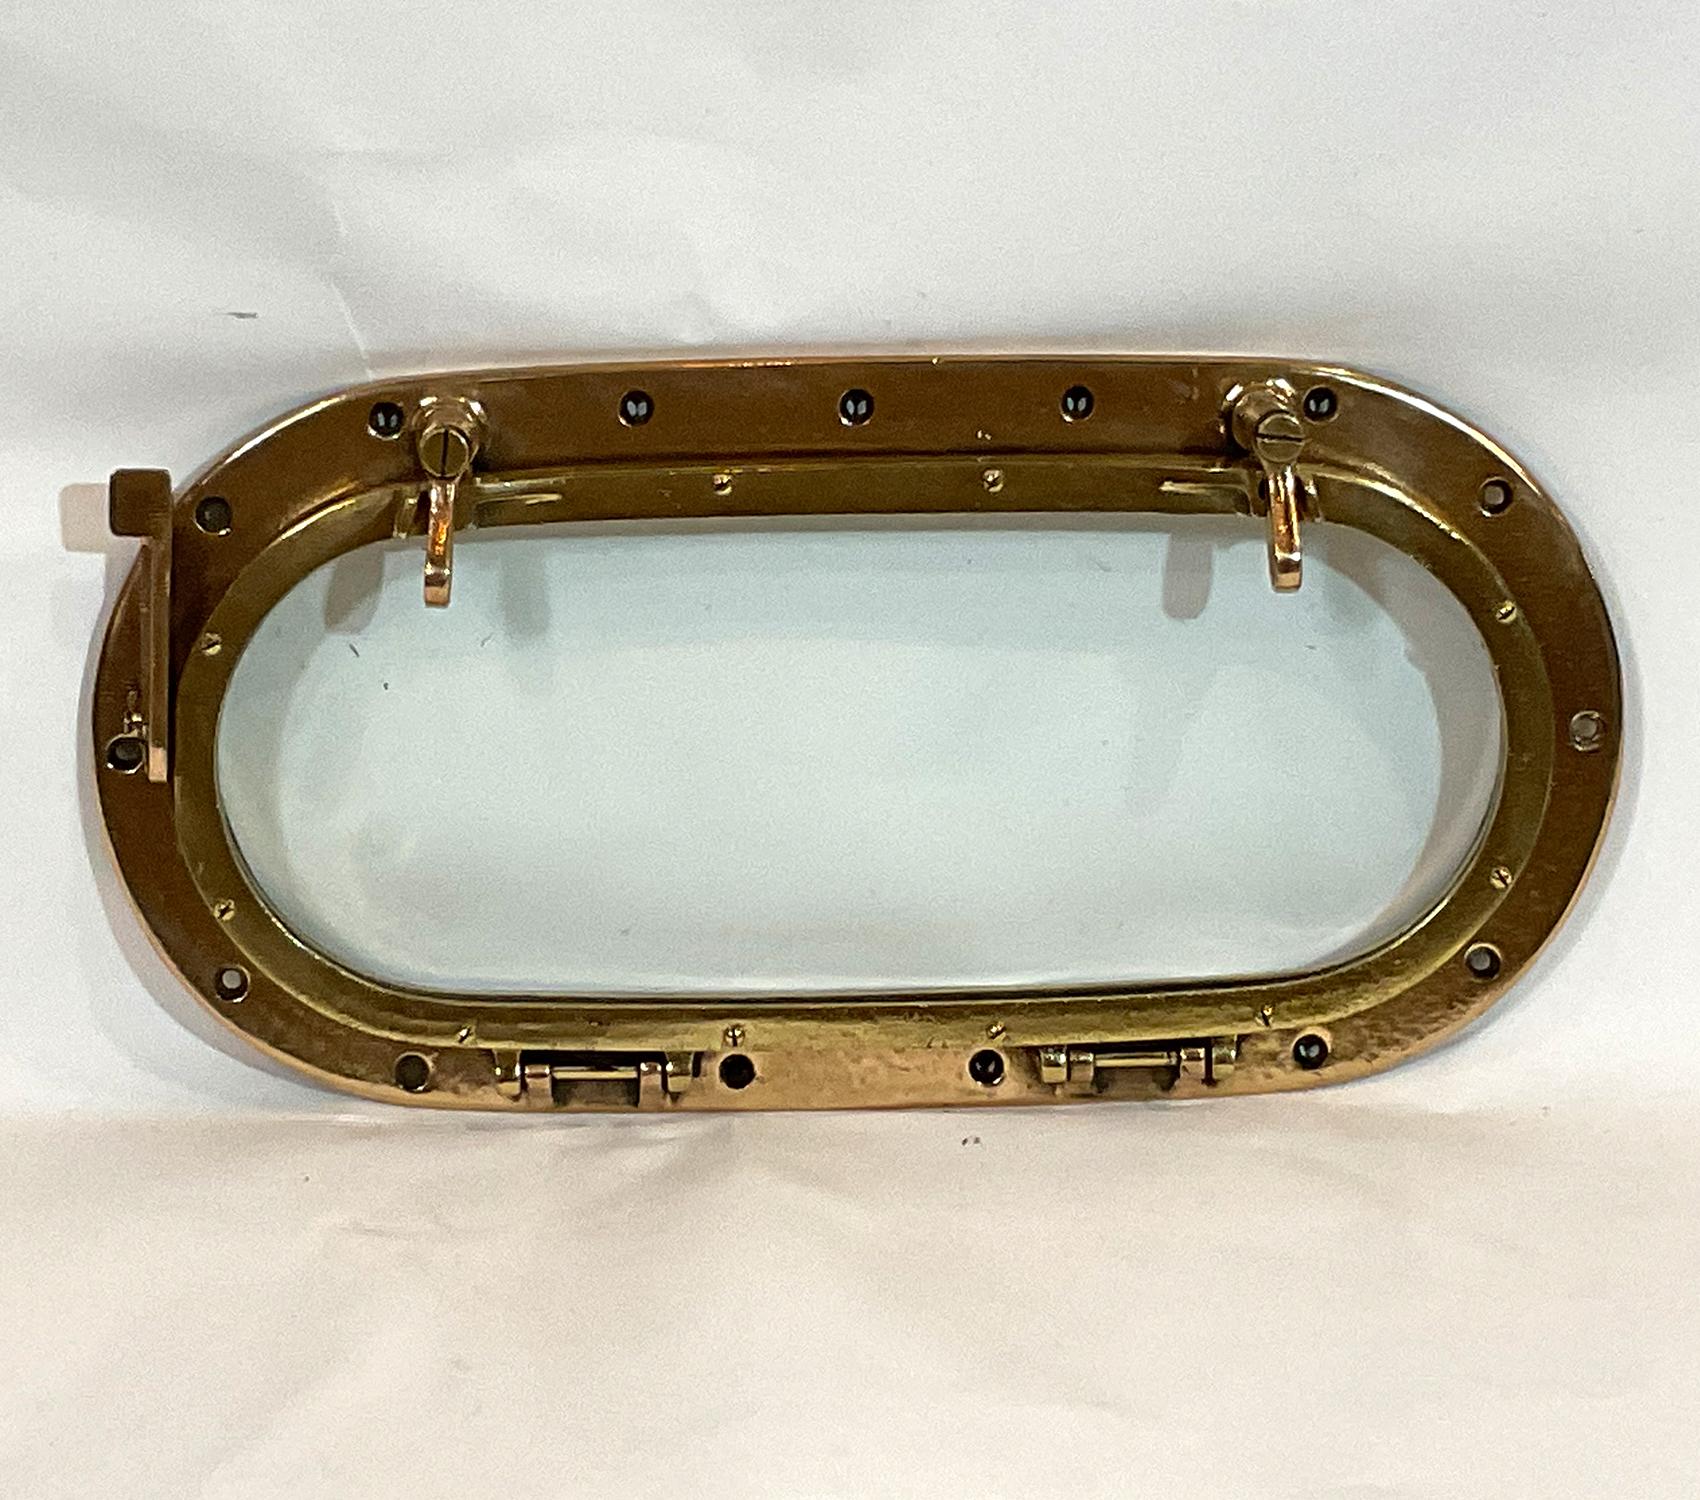 Highly polished boat porthole with hinged door with two latches. Great nautical relic. Clear glass.

Weight: 14 LBS
Overall Dimensions: 2” H x 21” L x 11” W
Glass 17 1/2